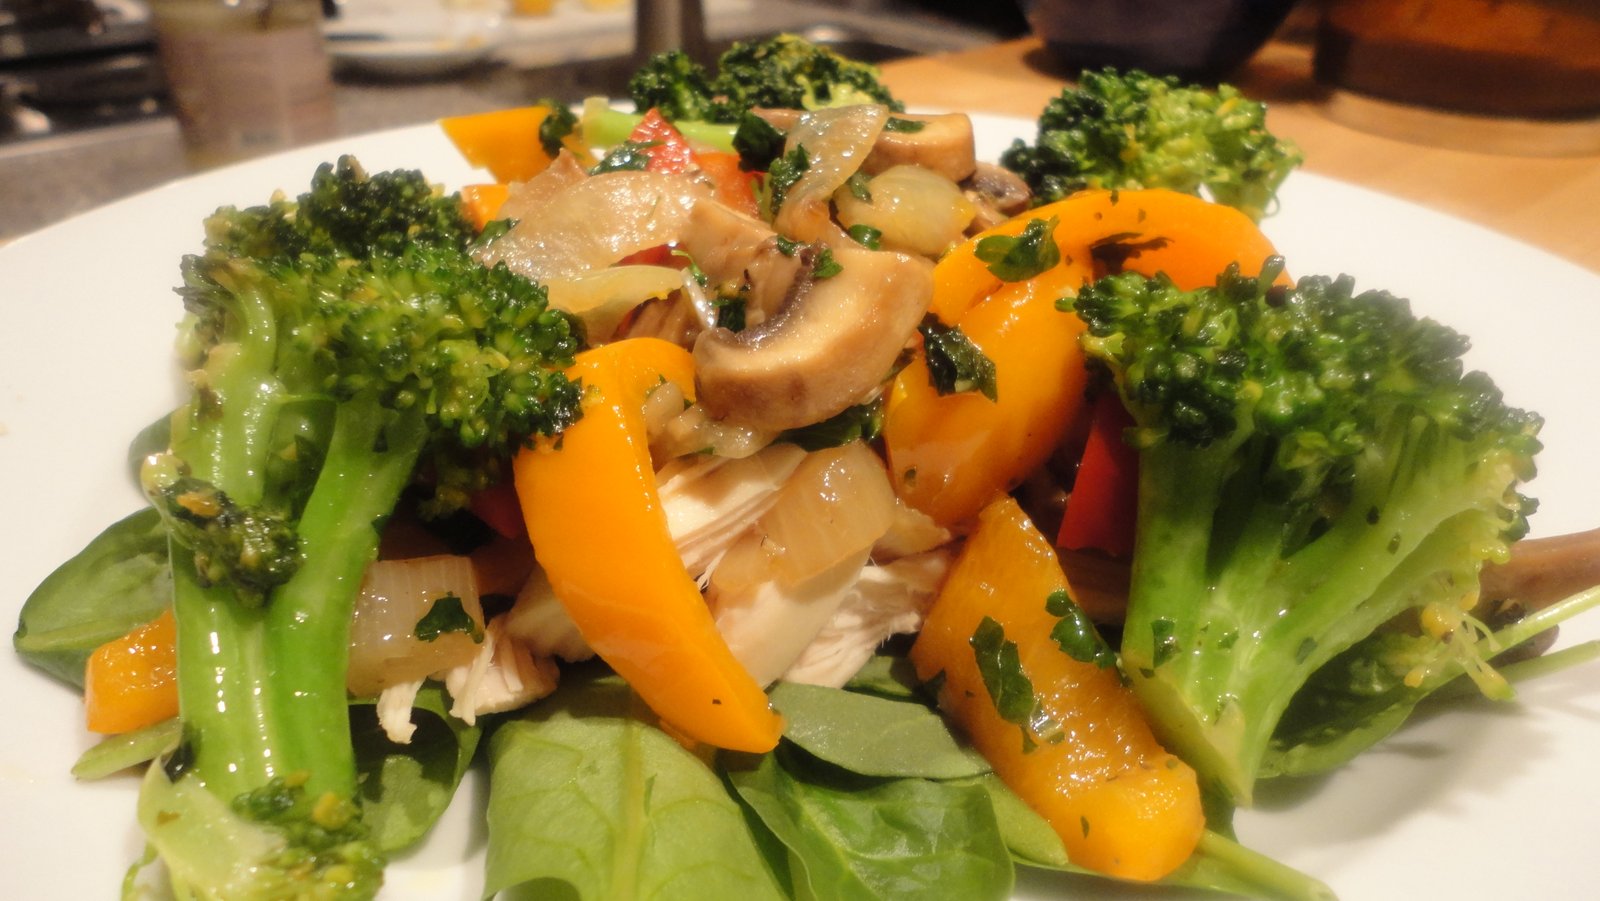 Recipe #48 | Sauteed Vegetable And Chicken Spinach Salad